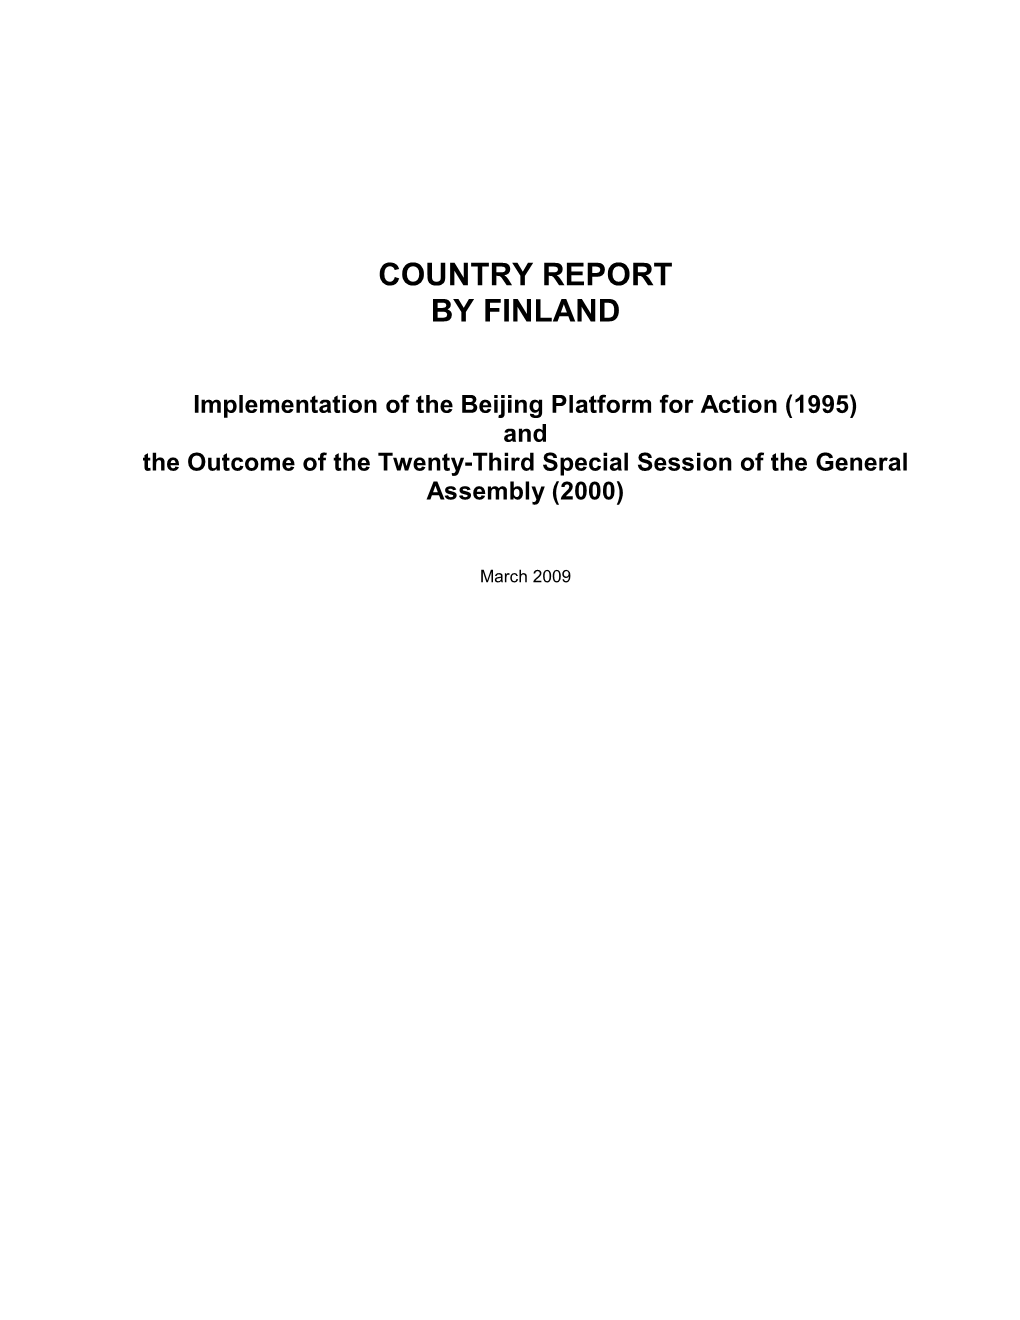 Country Report by Finland